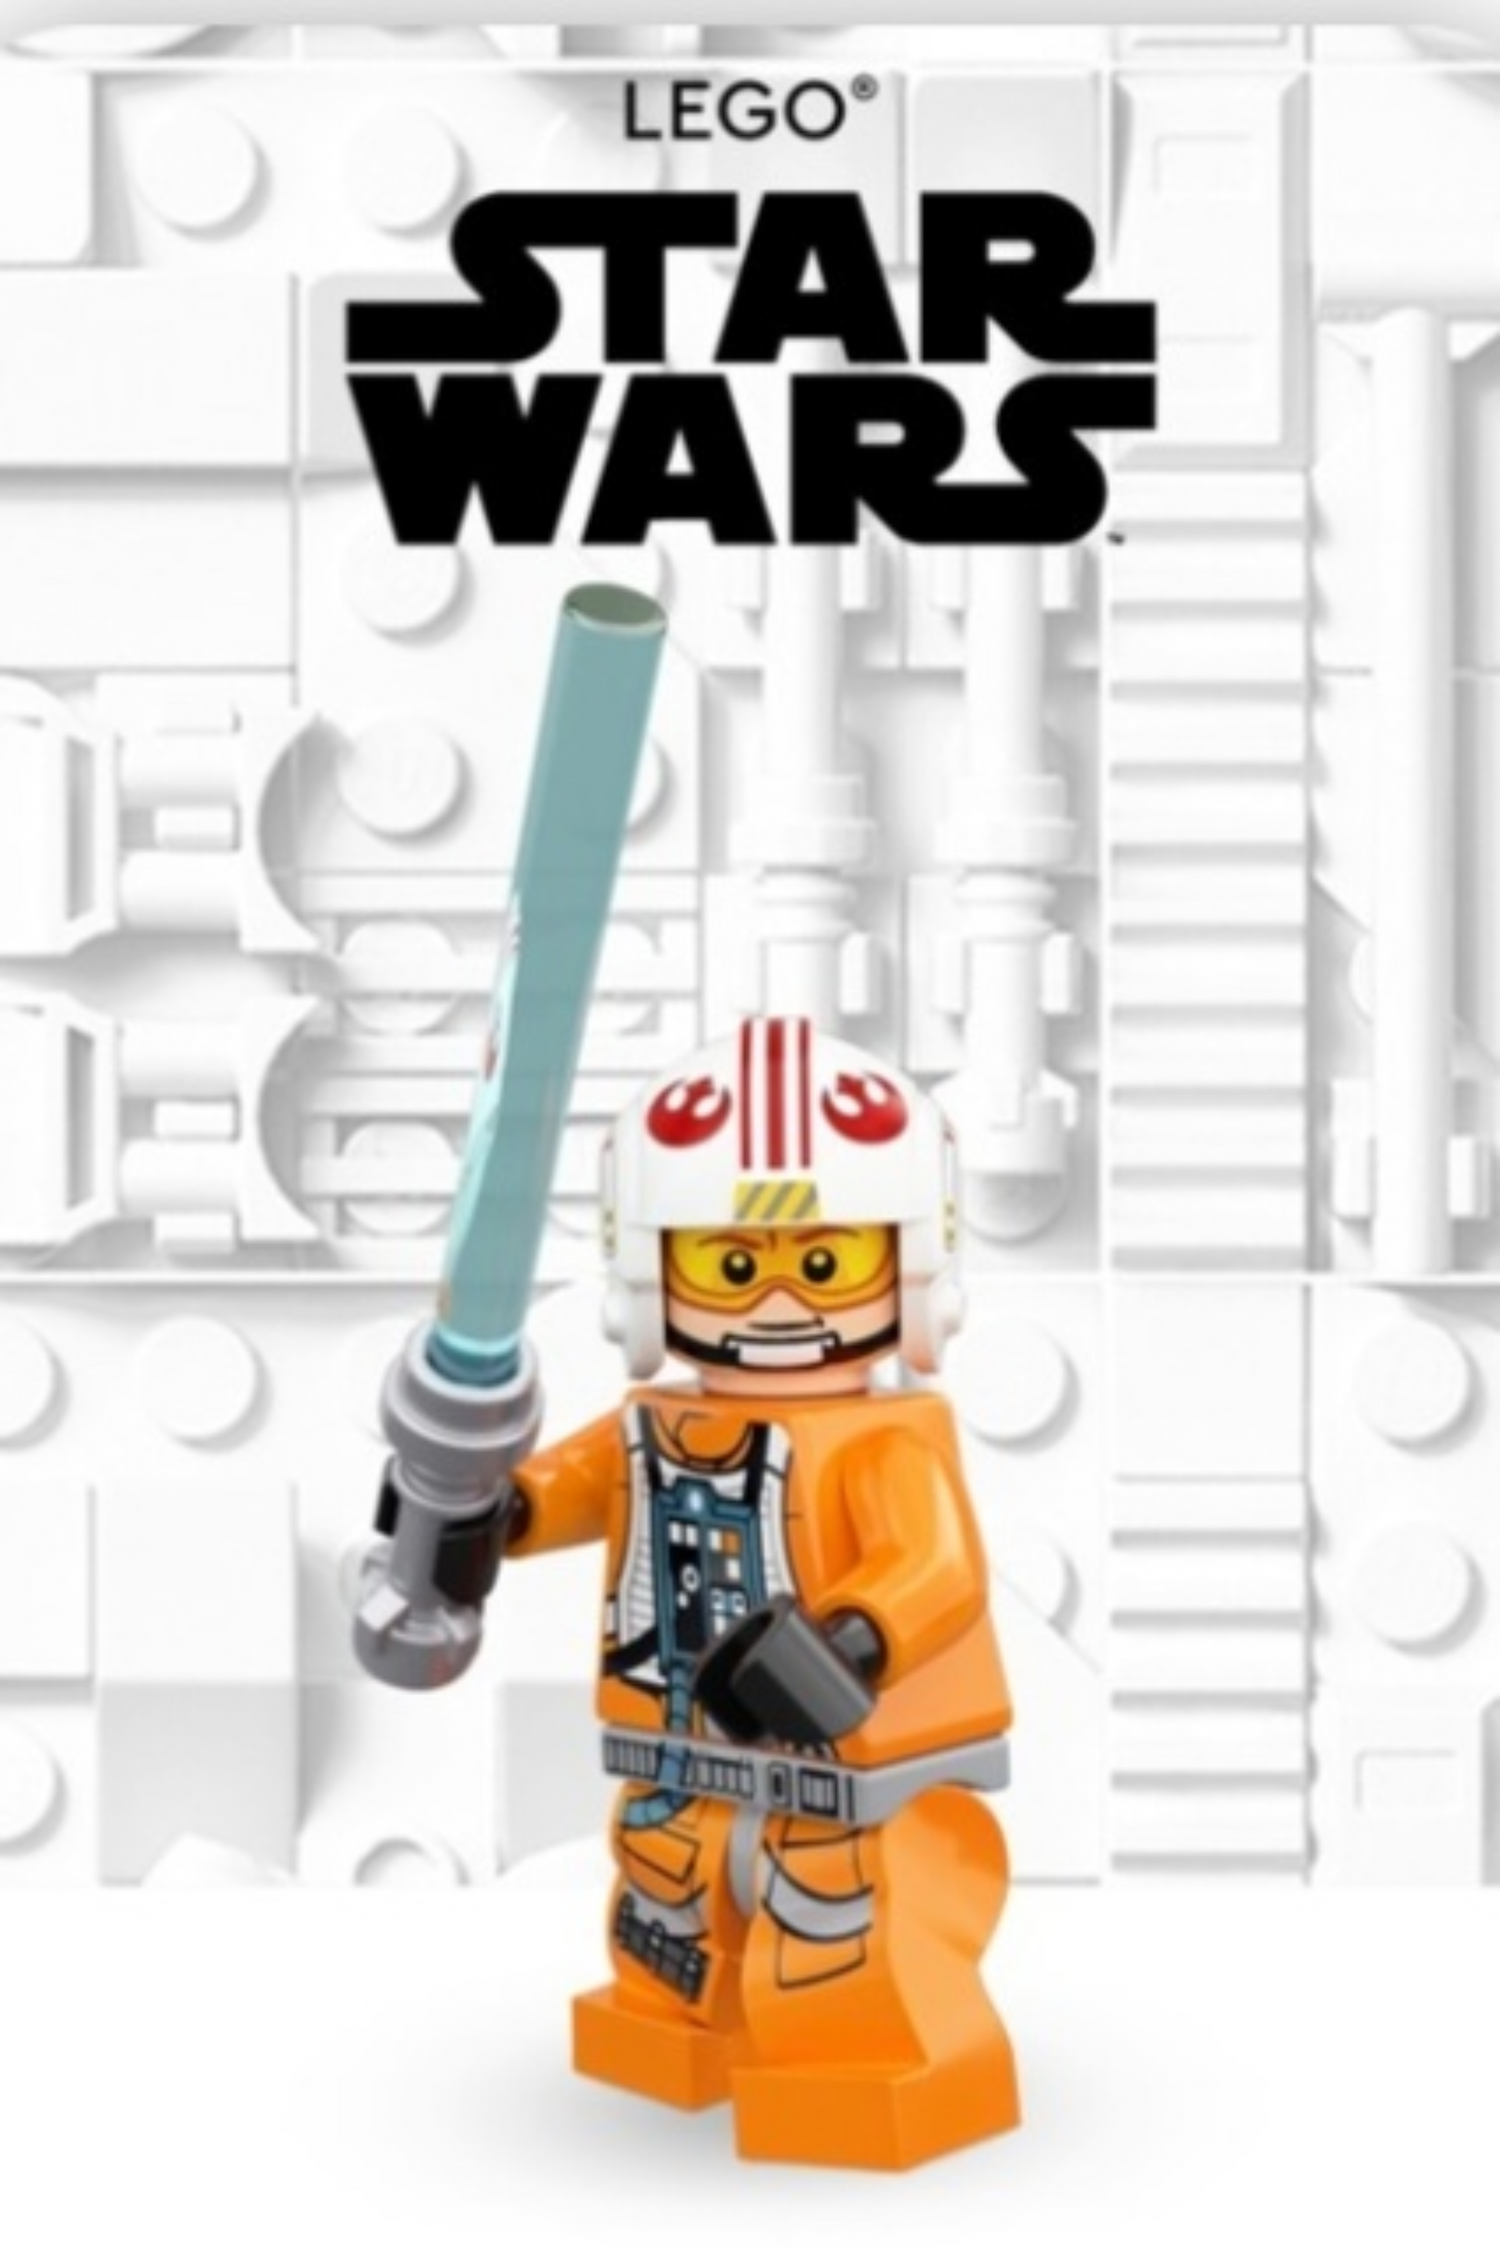 Star Wars Lego Minifigures Online South Africa